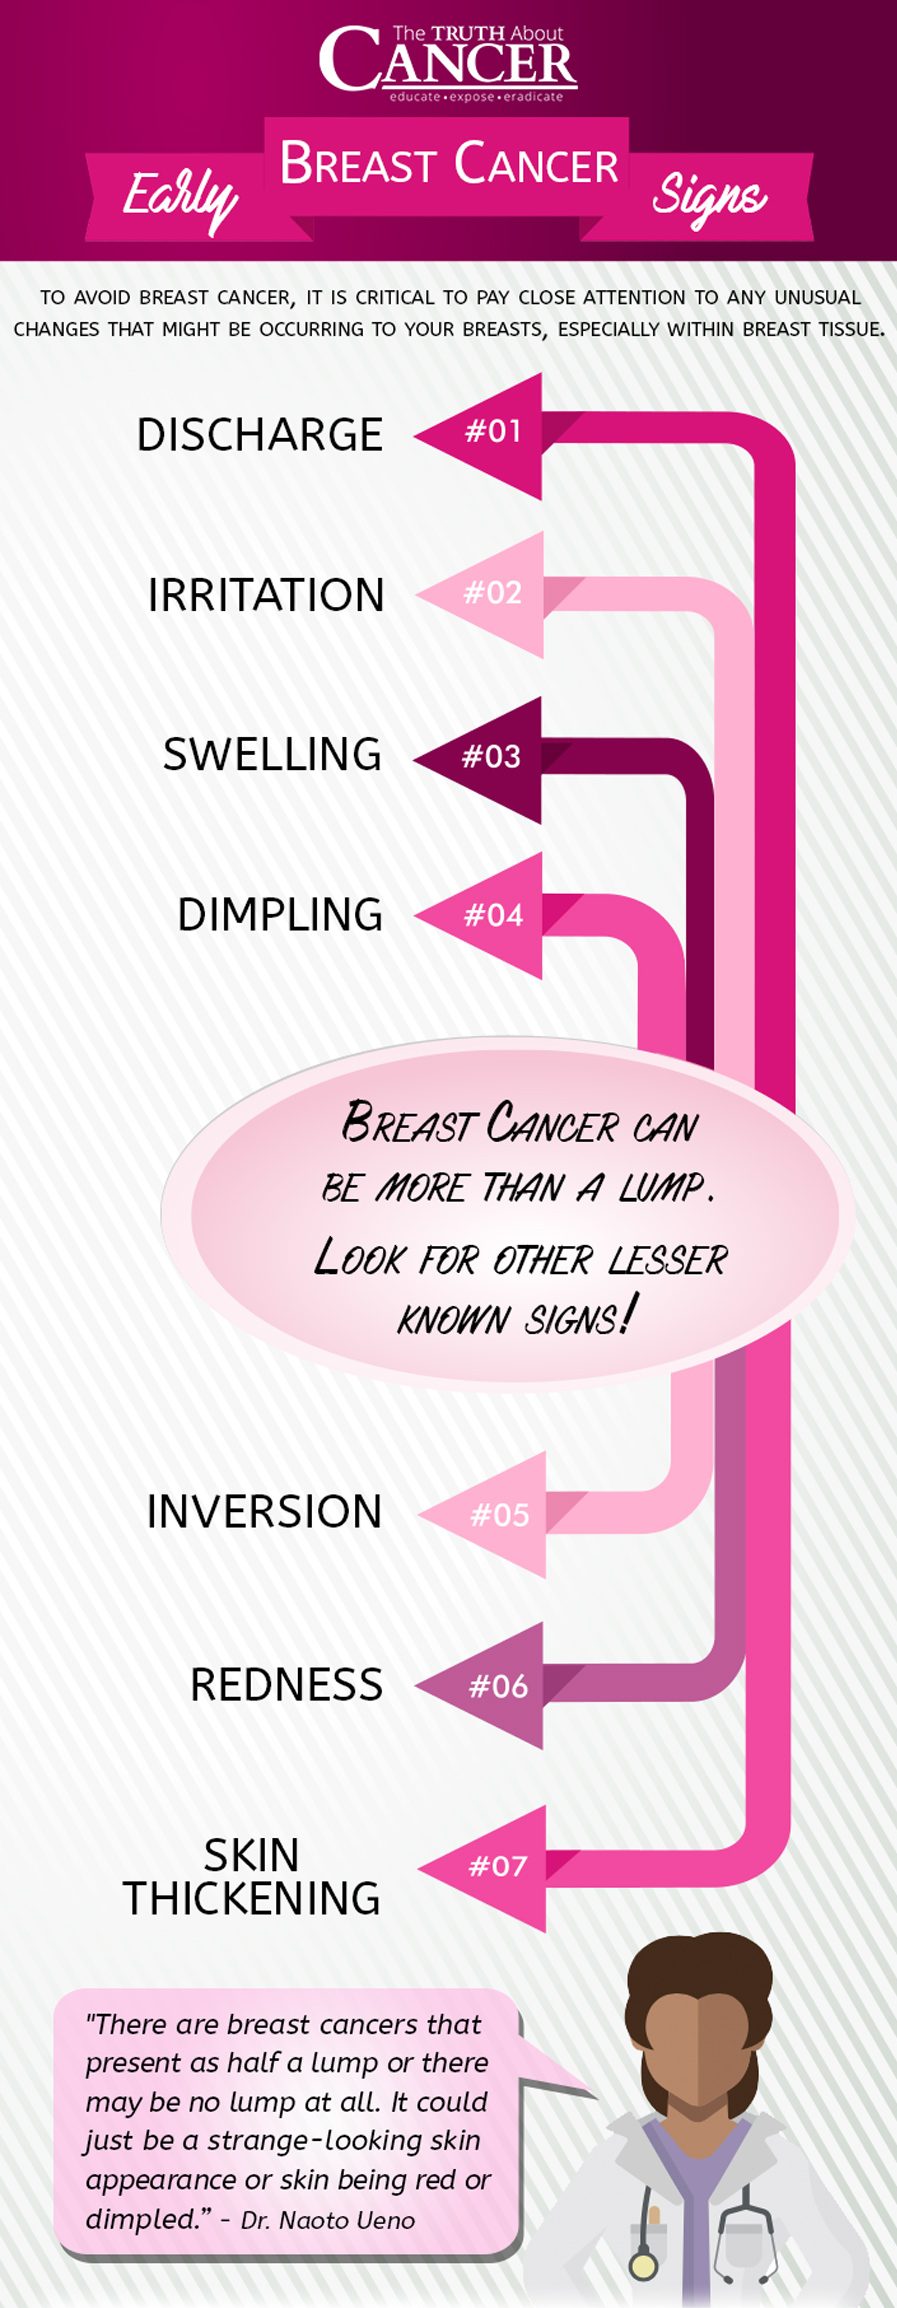 early-Breast-Cancer-signs